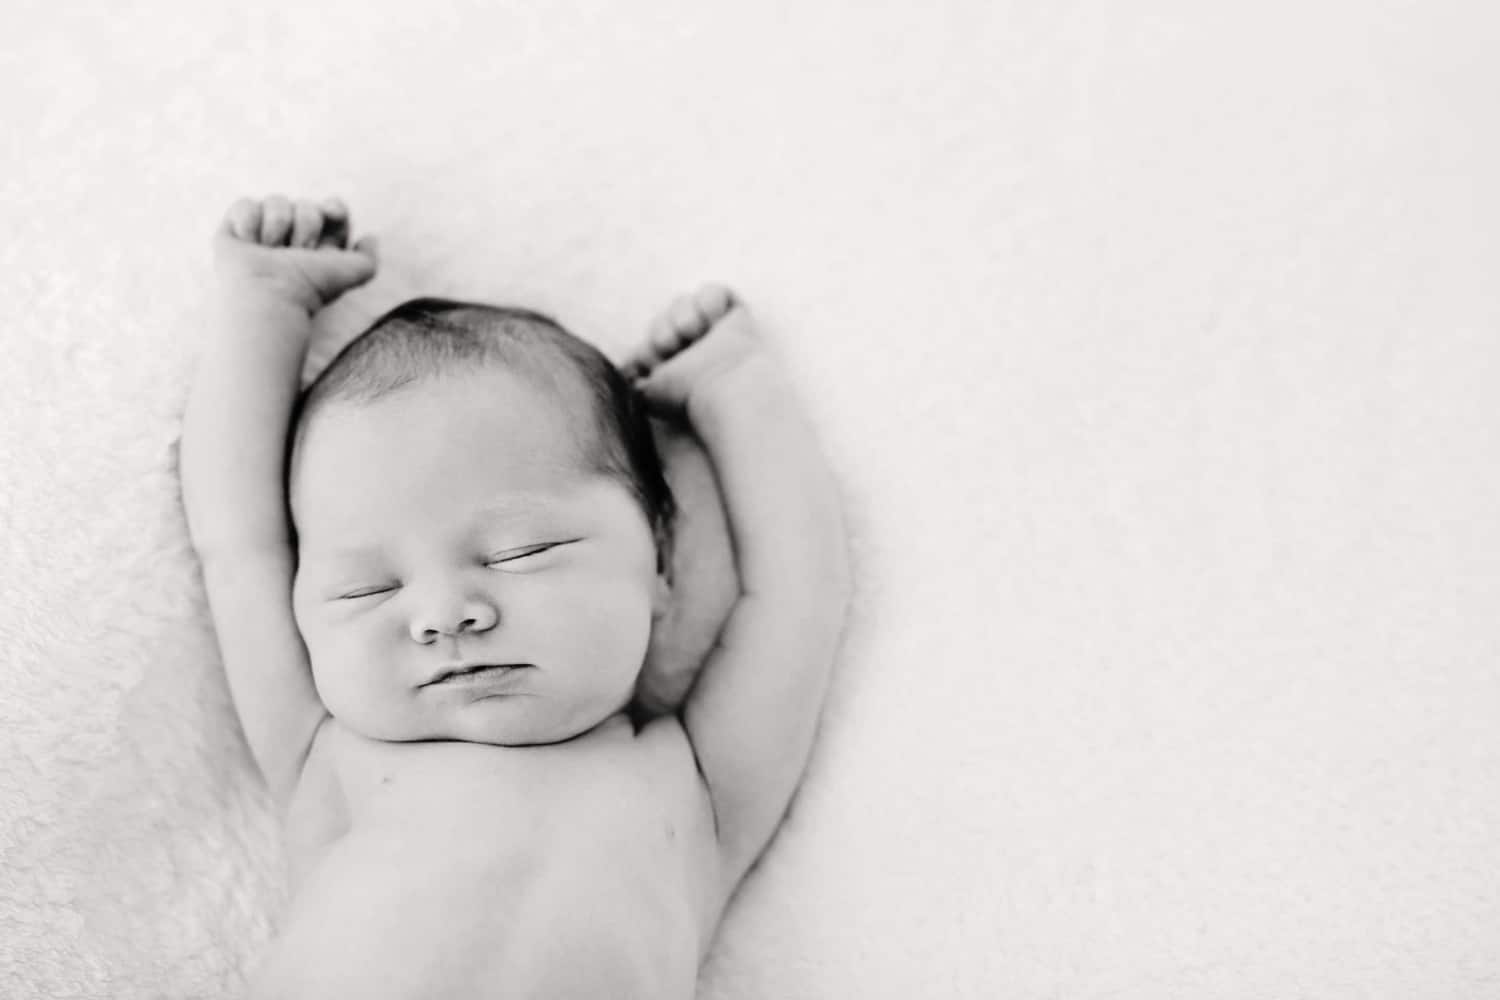 A newborn baby stretches on a soft background.